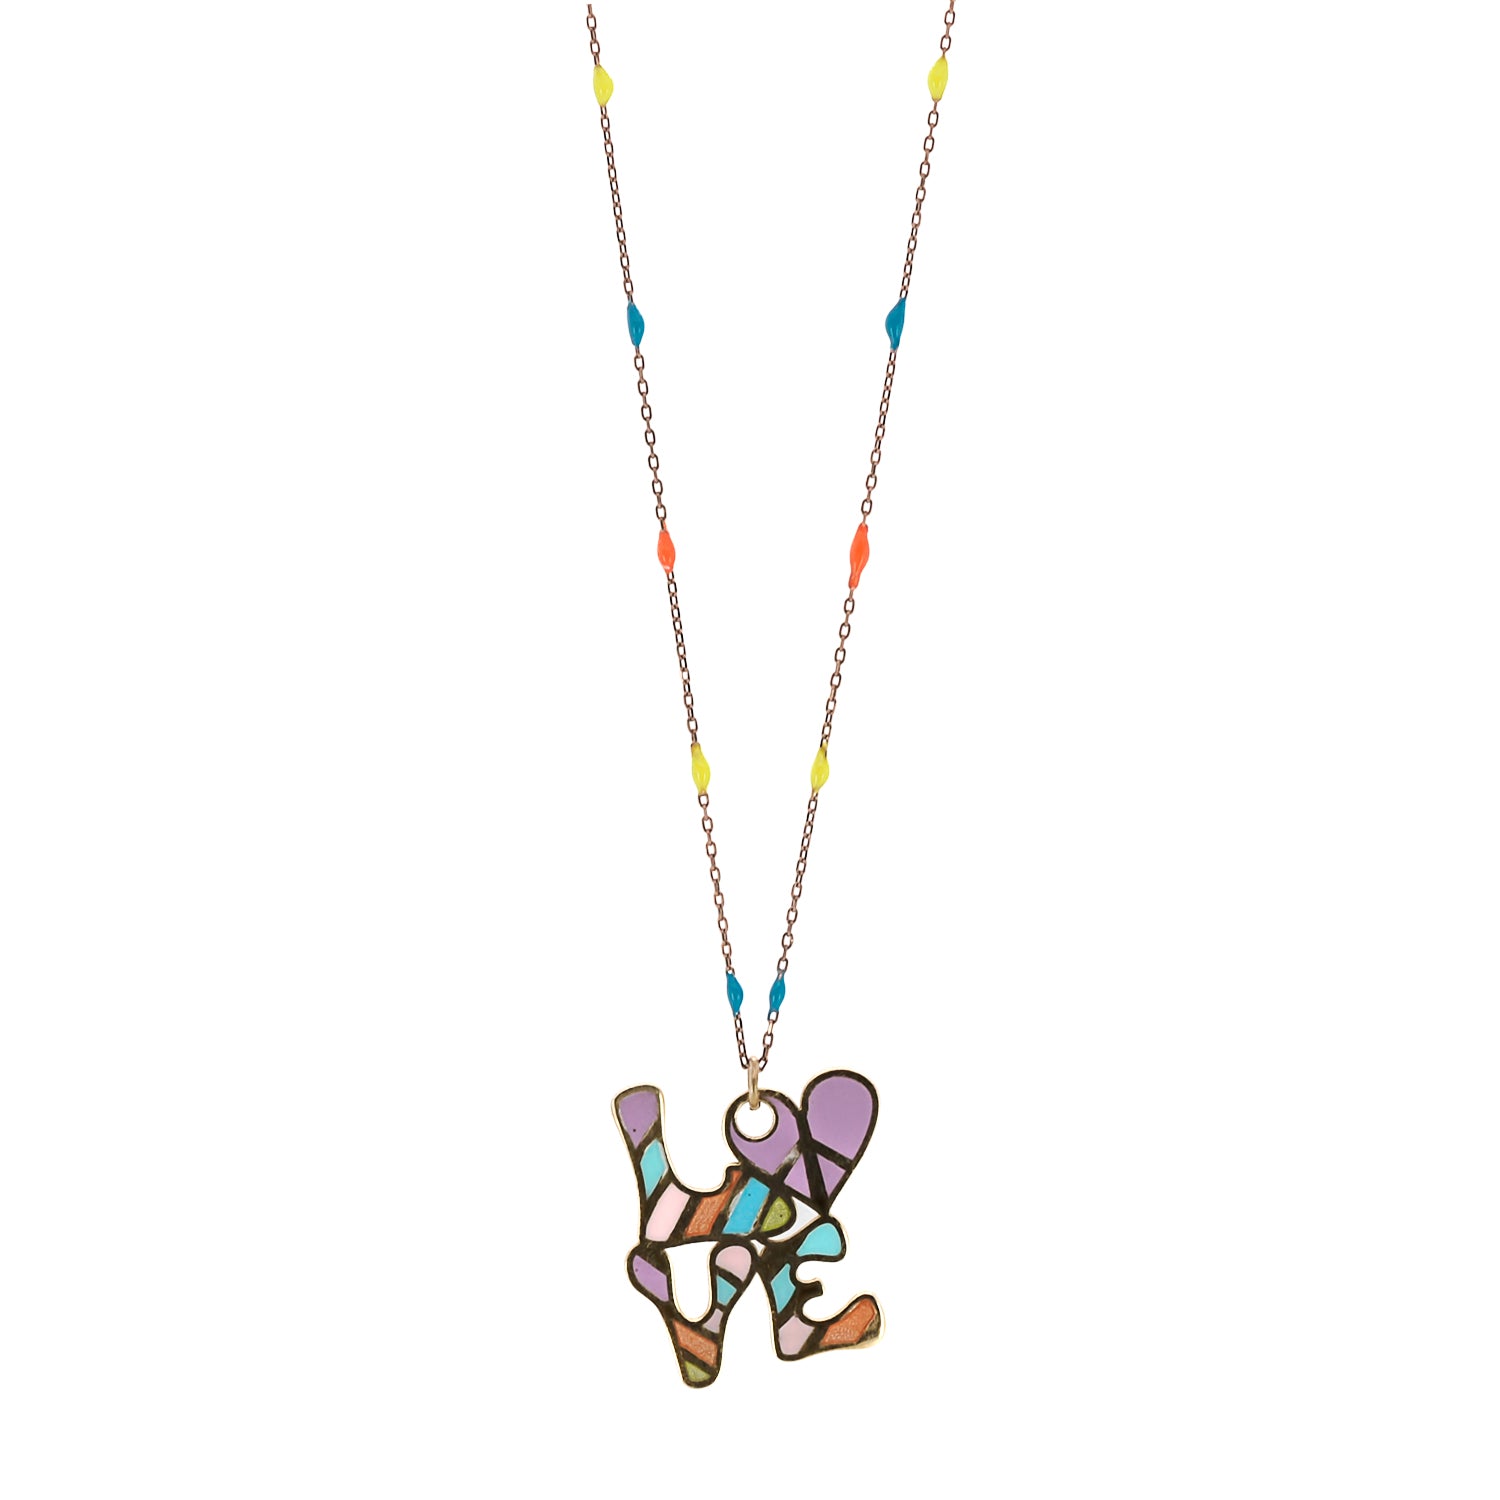 The Color of Love Necklace features a delicate gold-plated chain made of sterling silver, adorned with a unique &quot;Love&quot; pendant. The colorful enamel beads on the pendant add depth and vibrancy to this meaningful and handcrafted piece of jewelry.